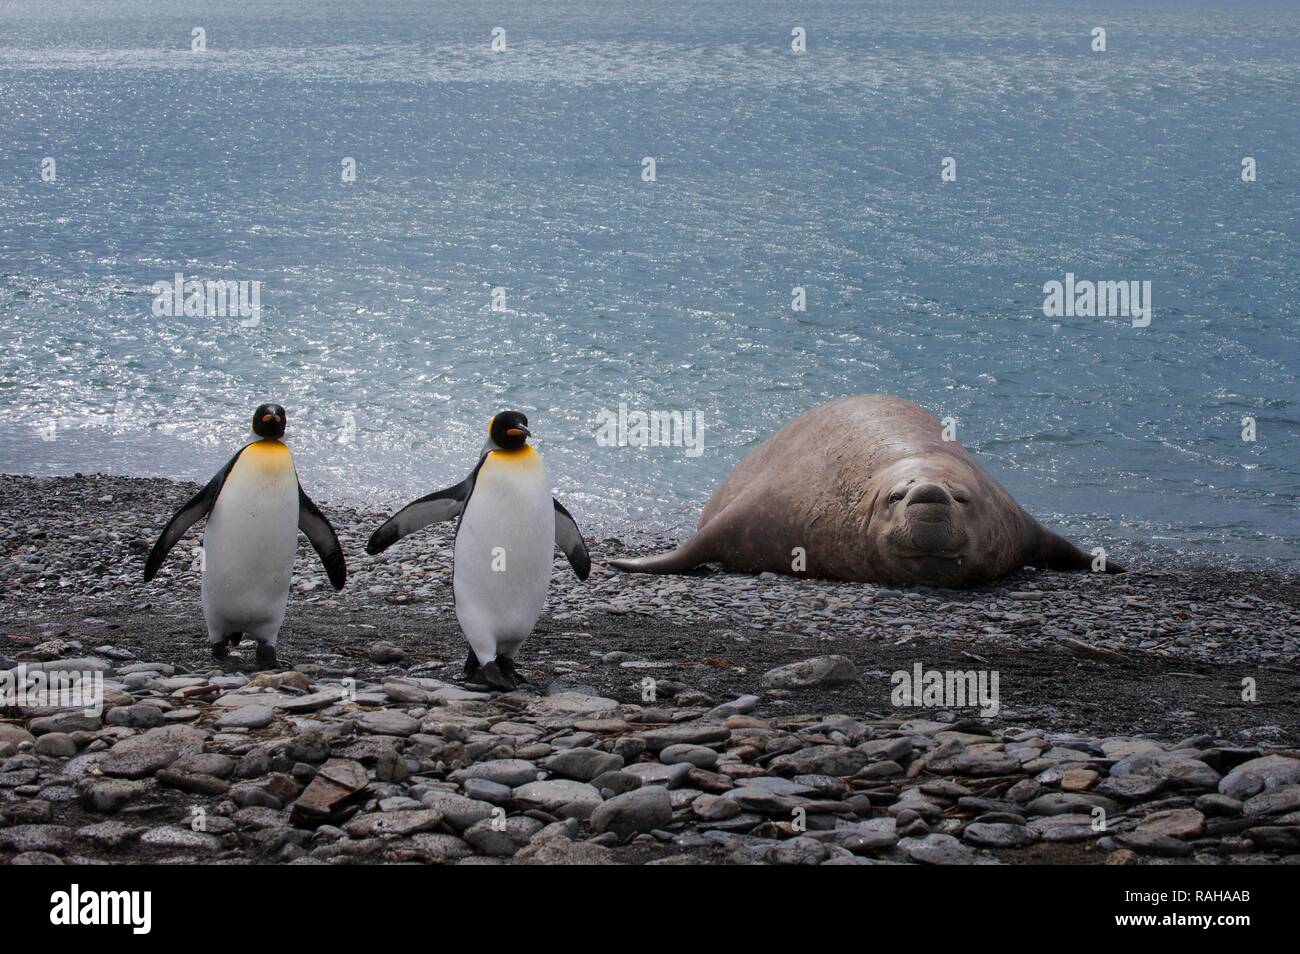 King penguins (Aptenodytes patagonicus) walking in front of a Southern Elephant Seal (Mirounga leonina) lying on the shore Stock Photo